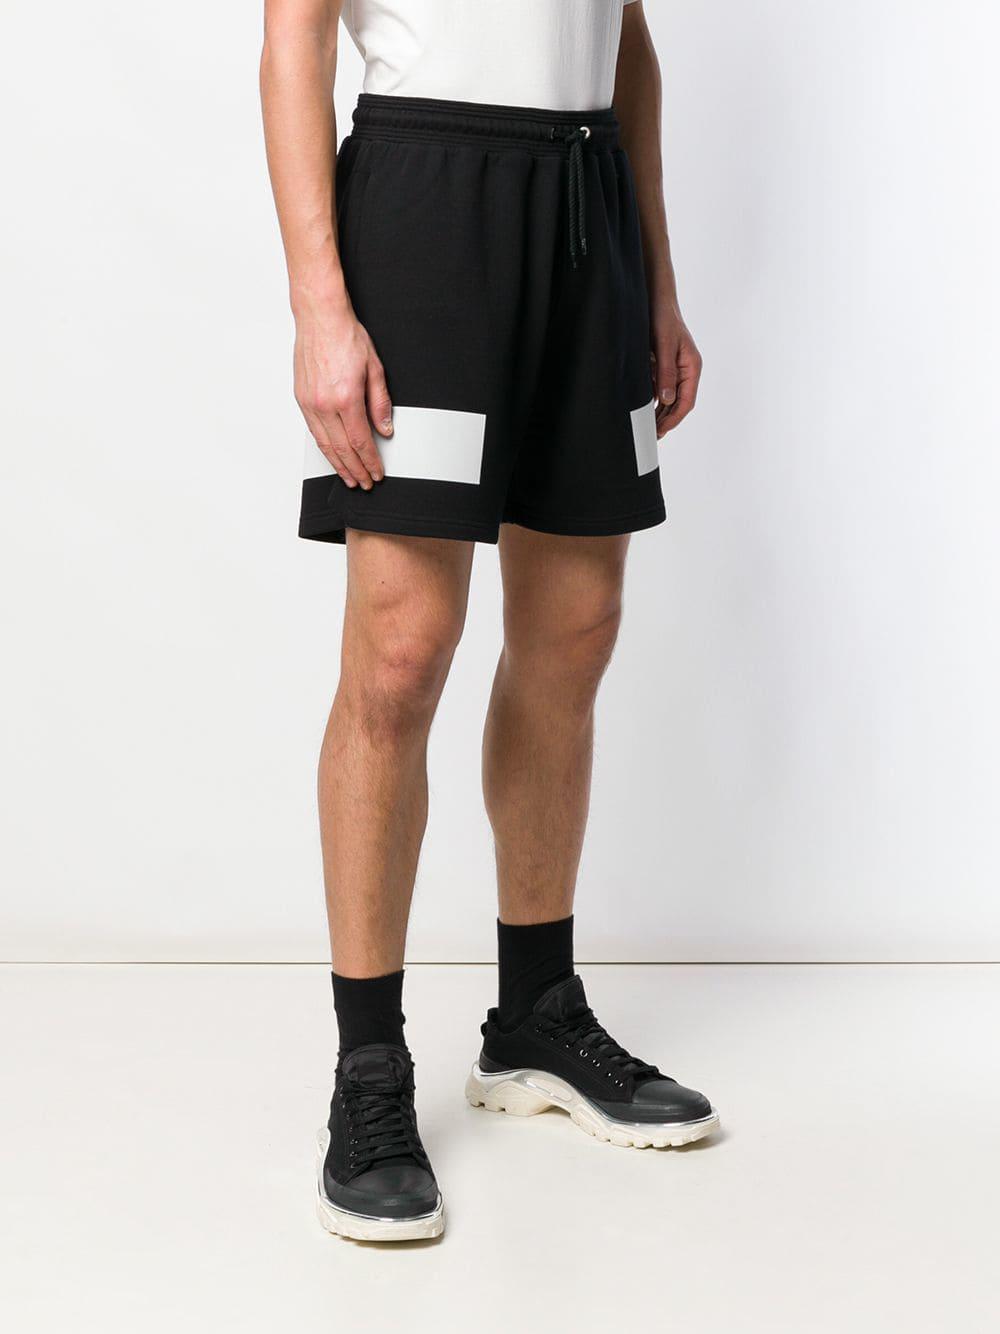 Lyst - Givenchy Contrast Print Shorts in Black for Men